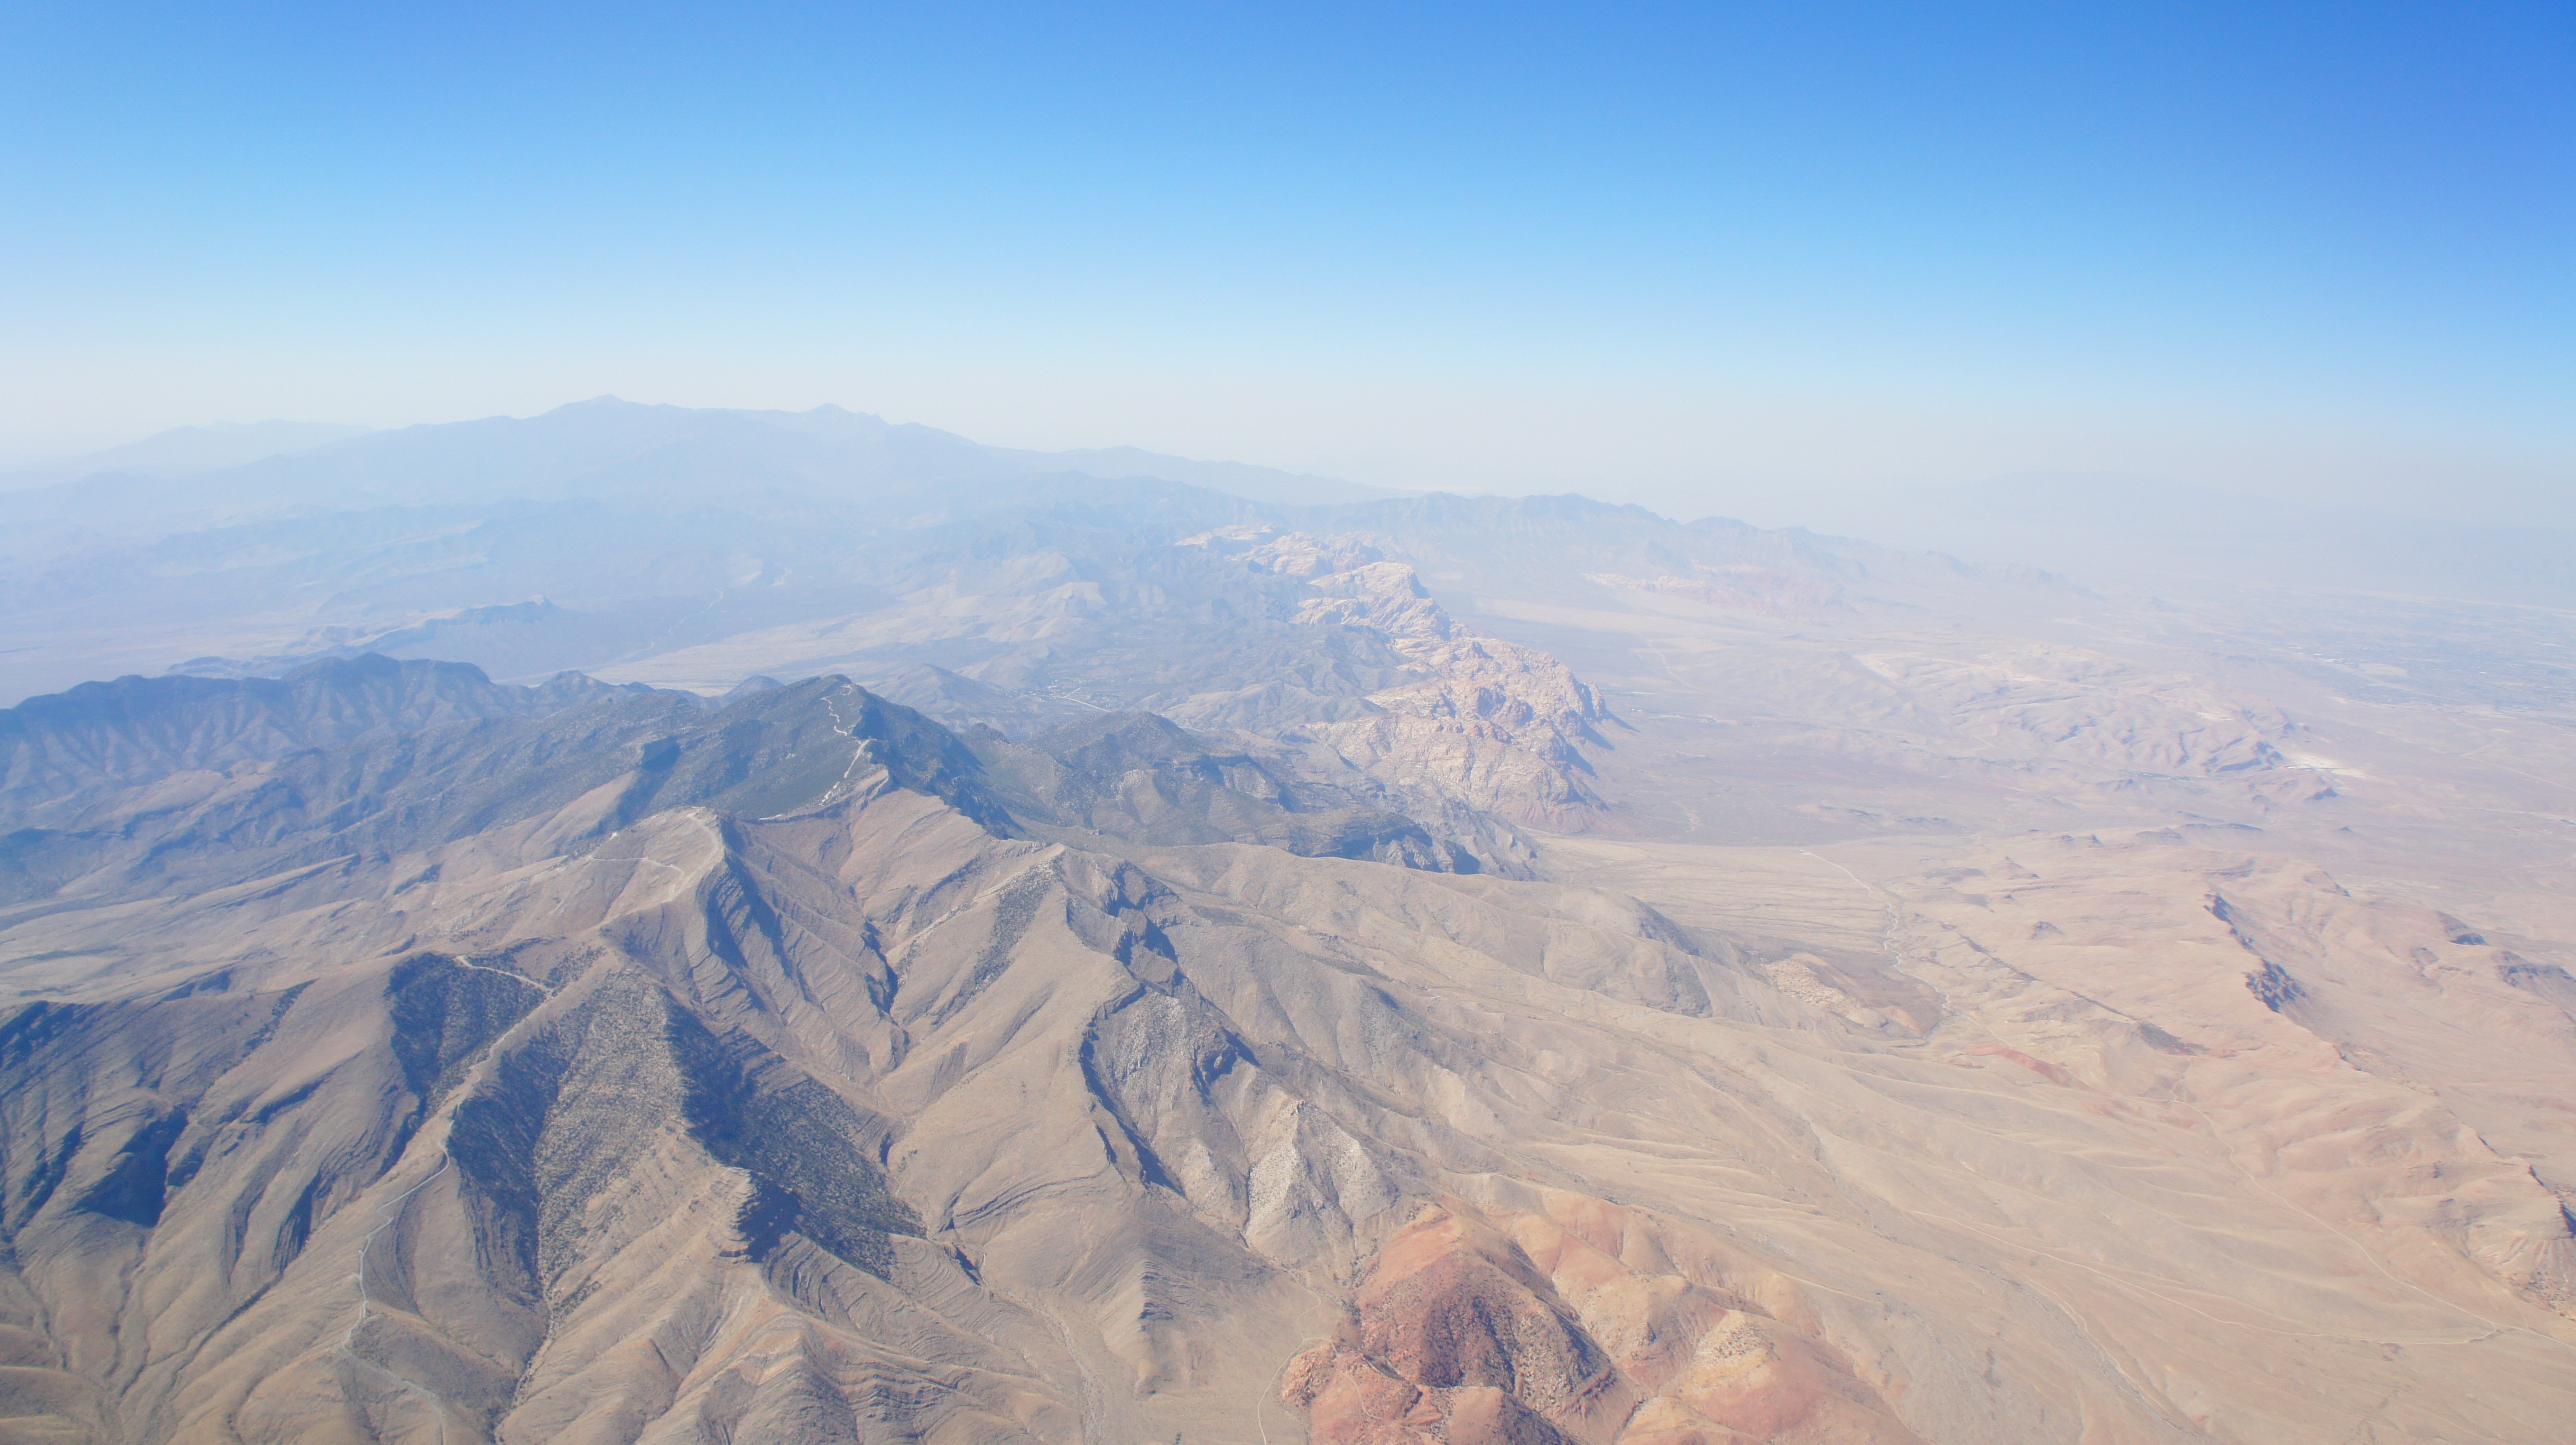 General 4592x2576 sunset clouds mountains desert aerial view